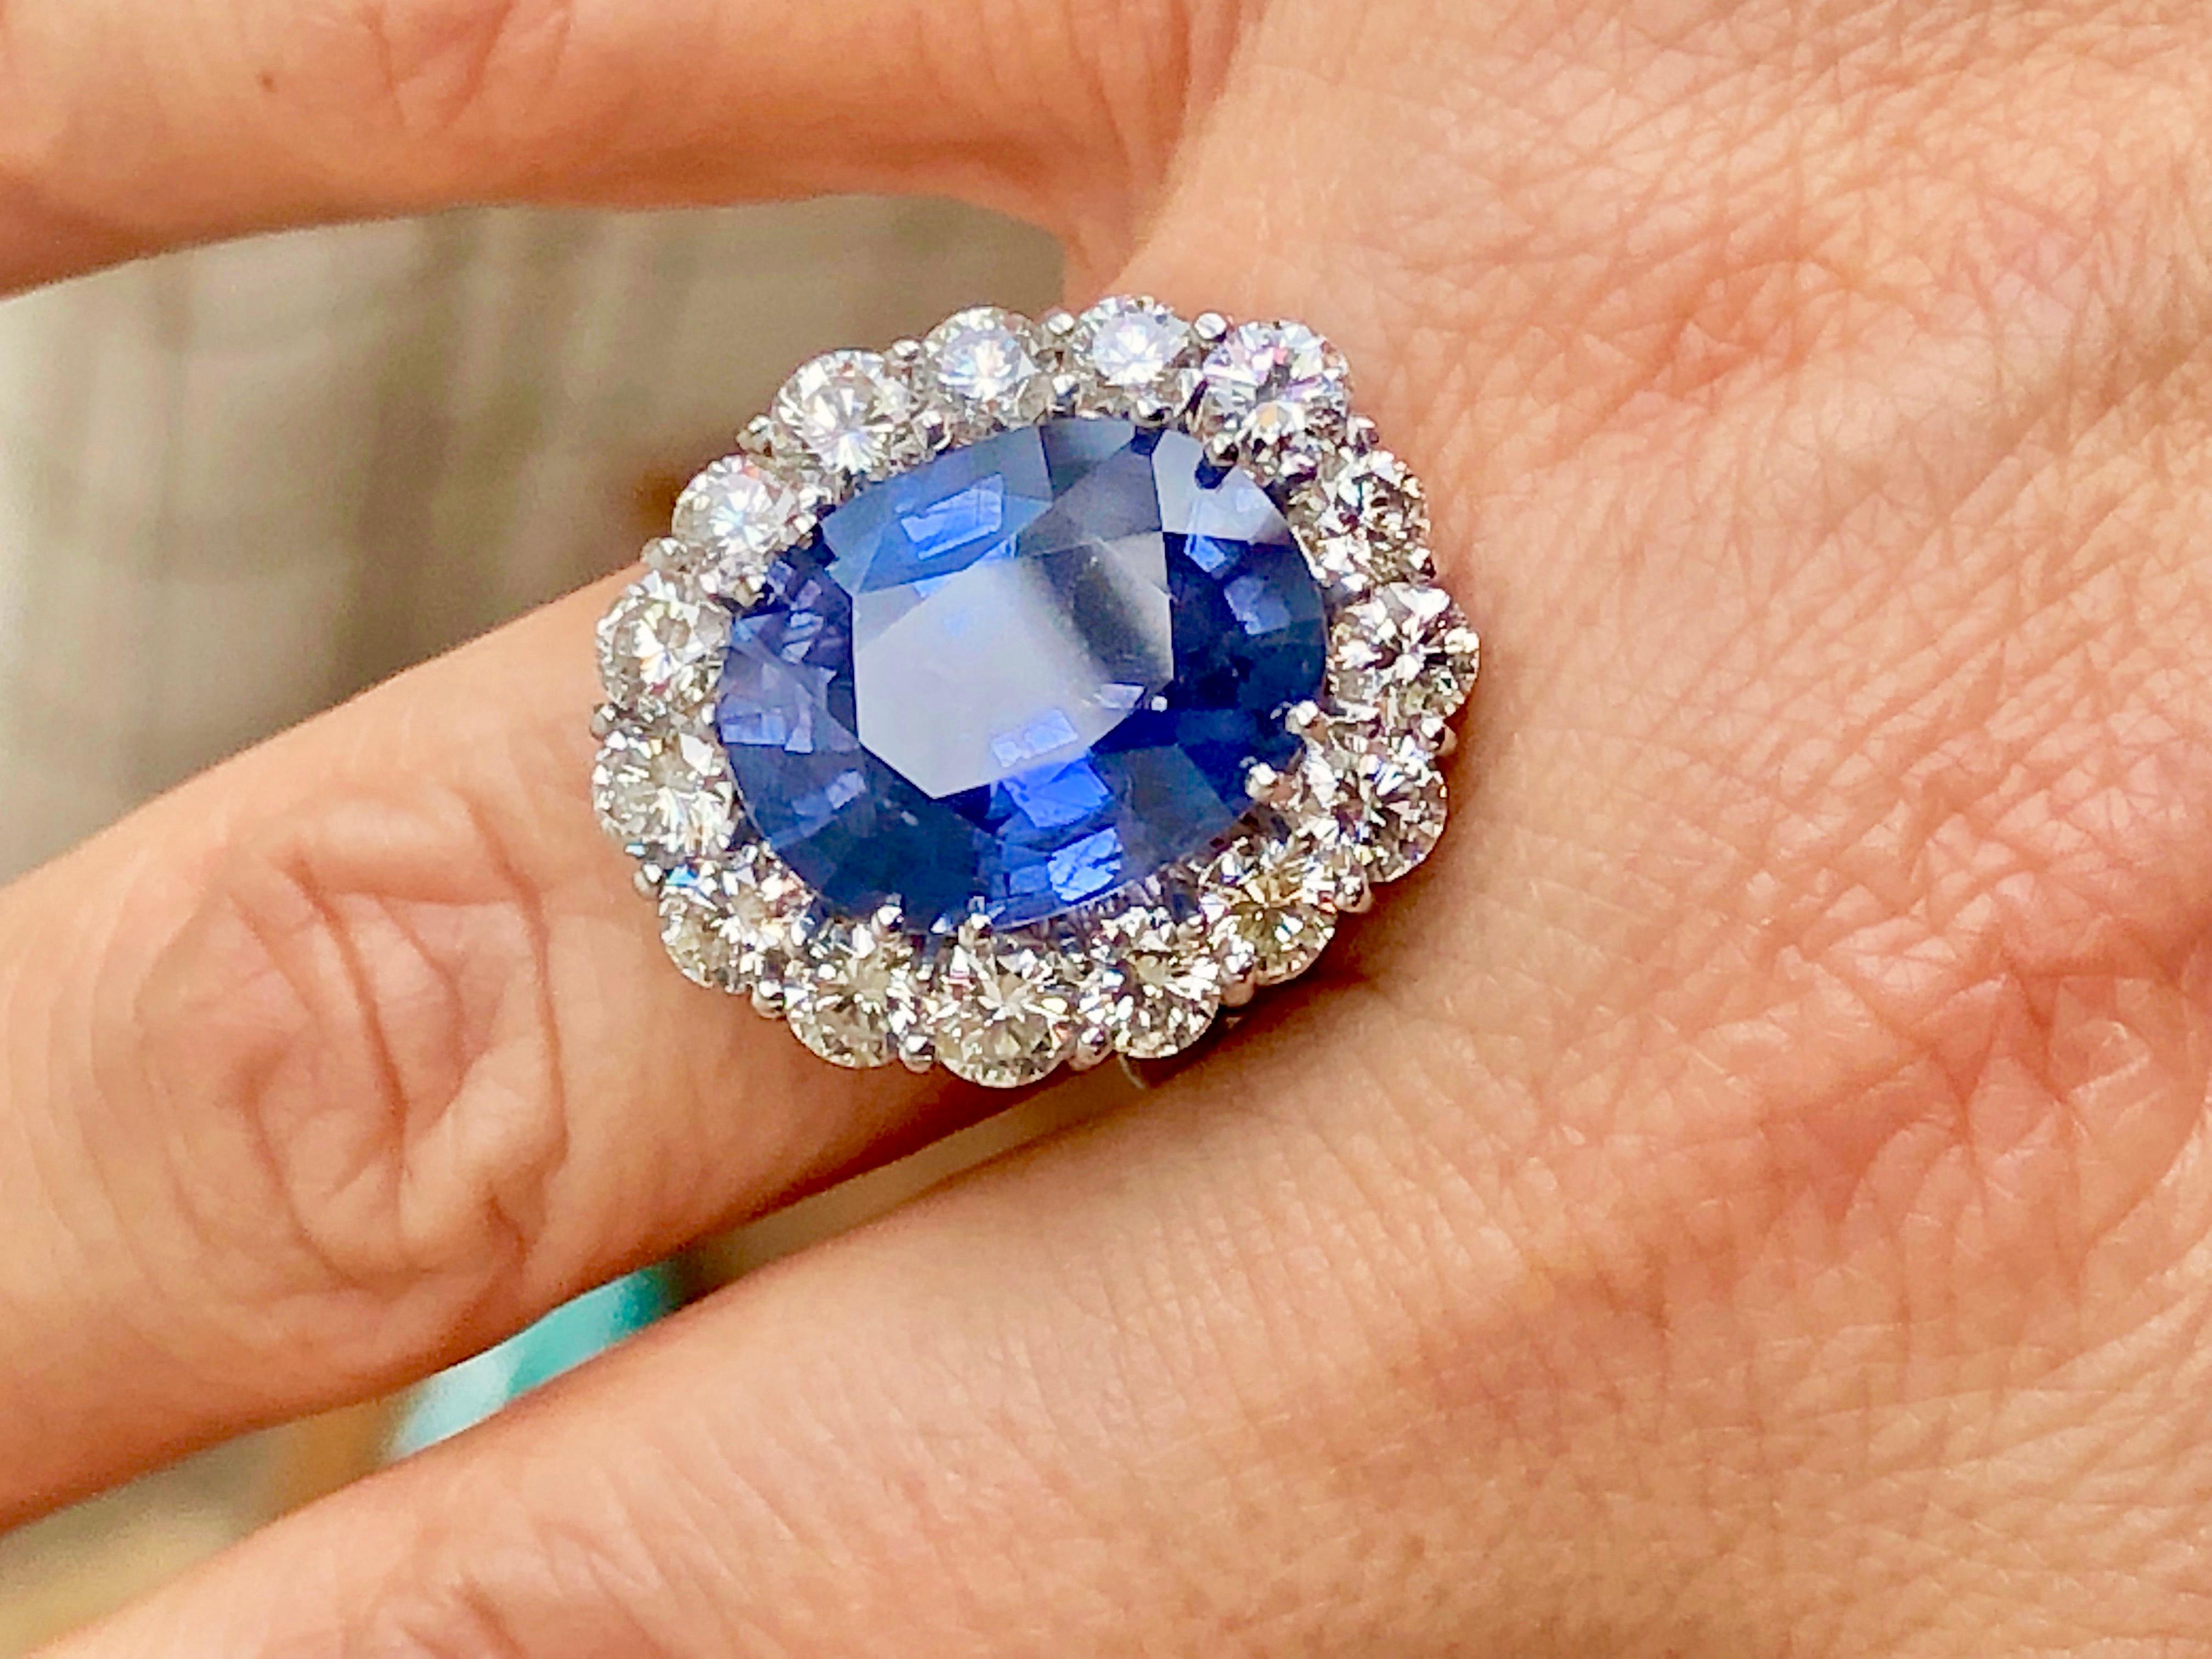 Magnificent, very large no heat, untreated oval cut blue sapphire 12.73 carat GIA Certified. 18K White Gold engagement ring. The ring was designed and made to bring out and showcase the natural beauty of the center stone. Fifteen white brilliant